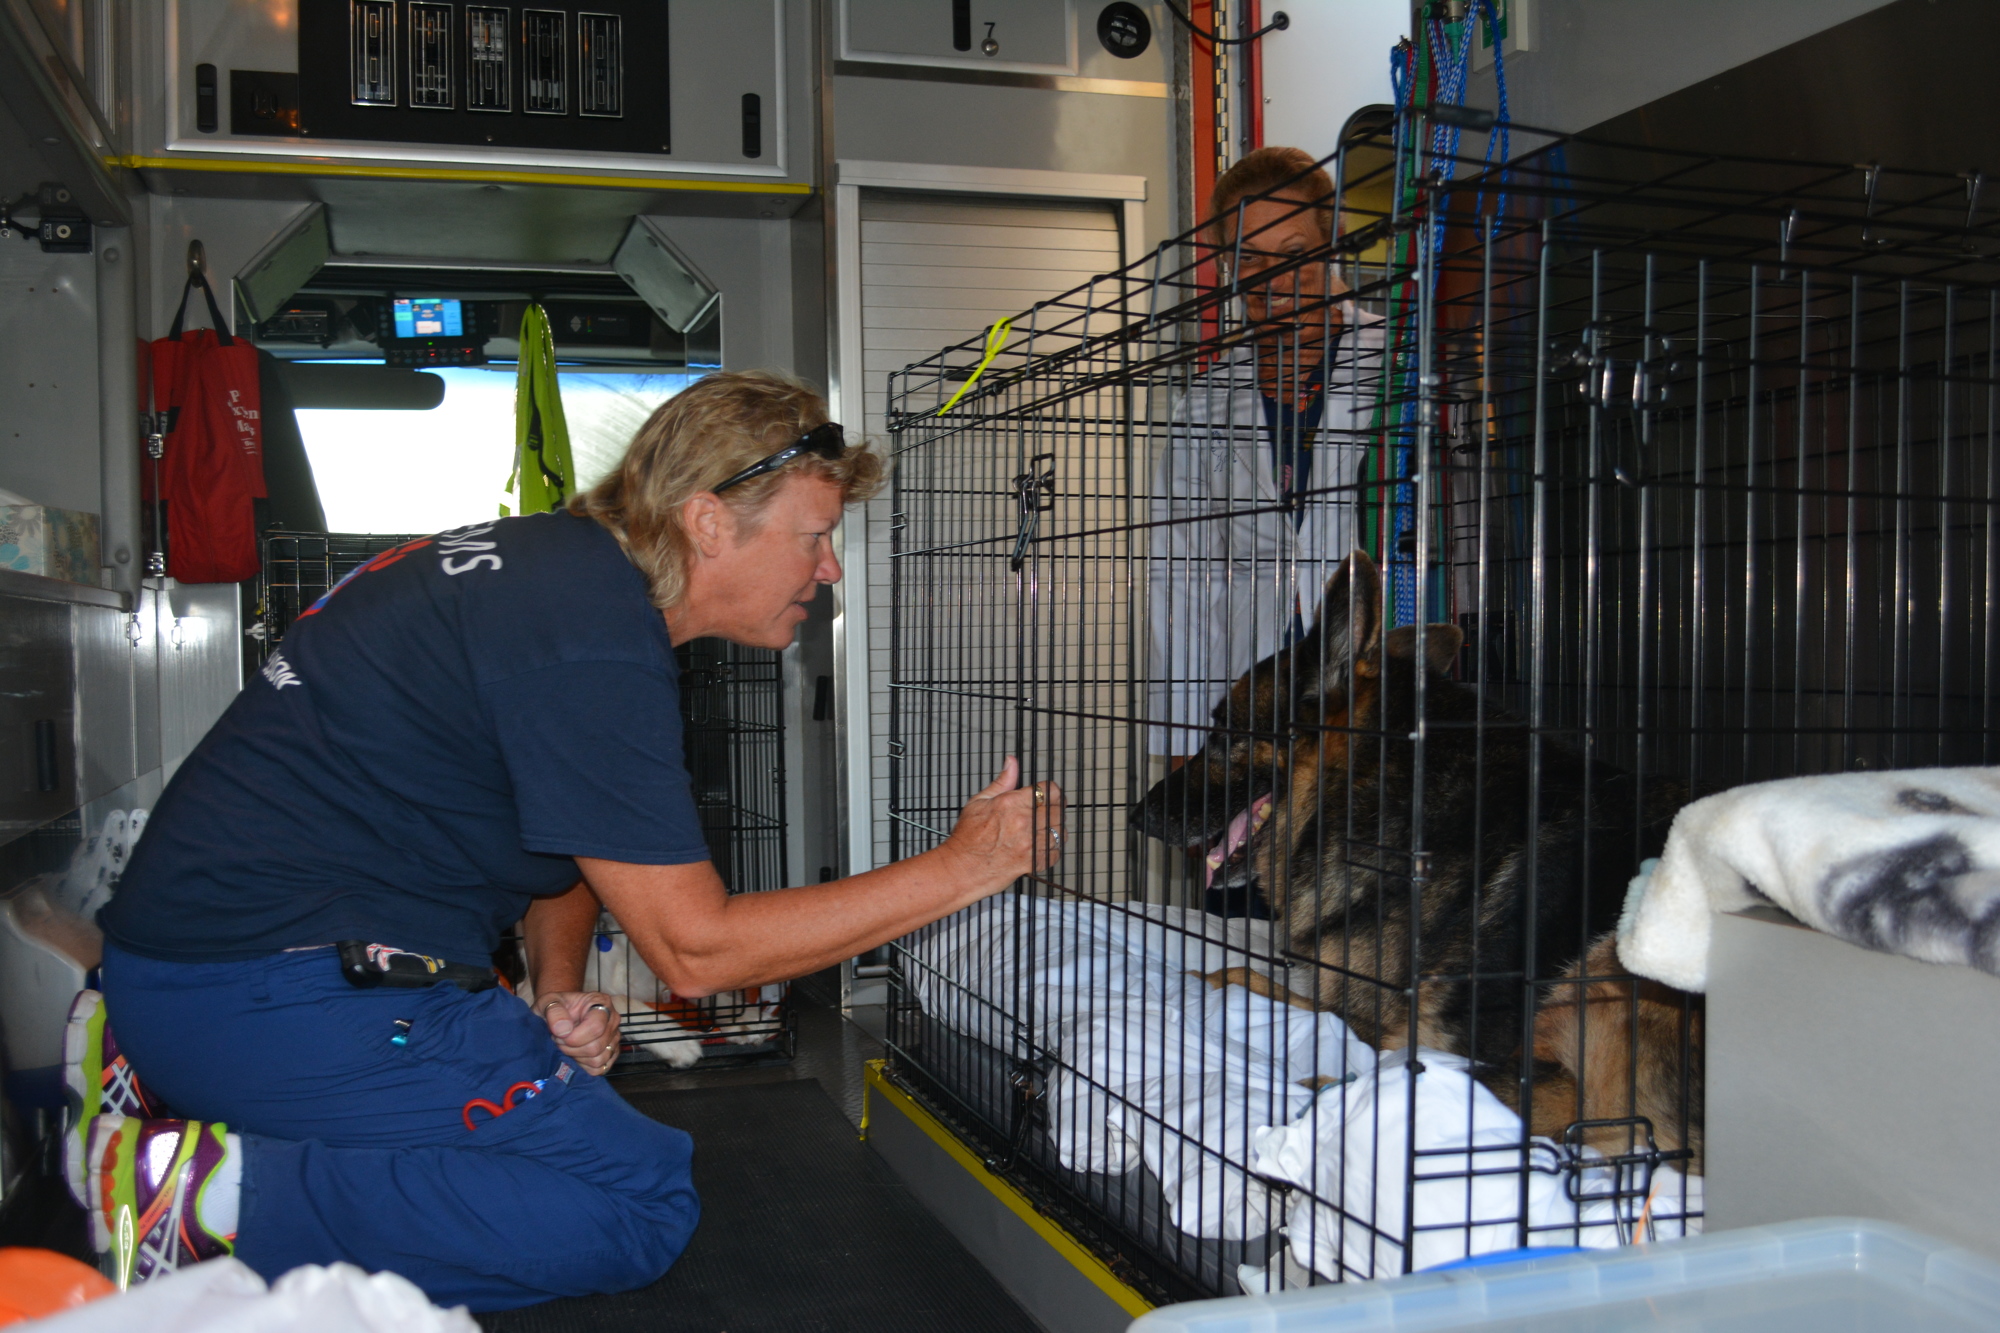 Cheryl Brady checks on Kash, who had surgery the night before, as she gets ready to transport him.